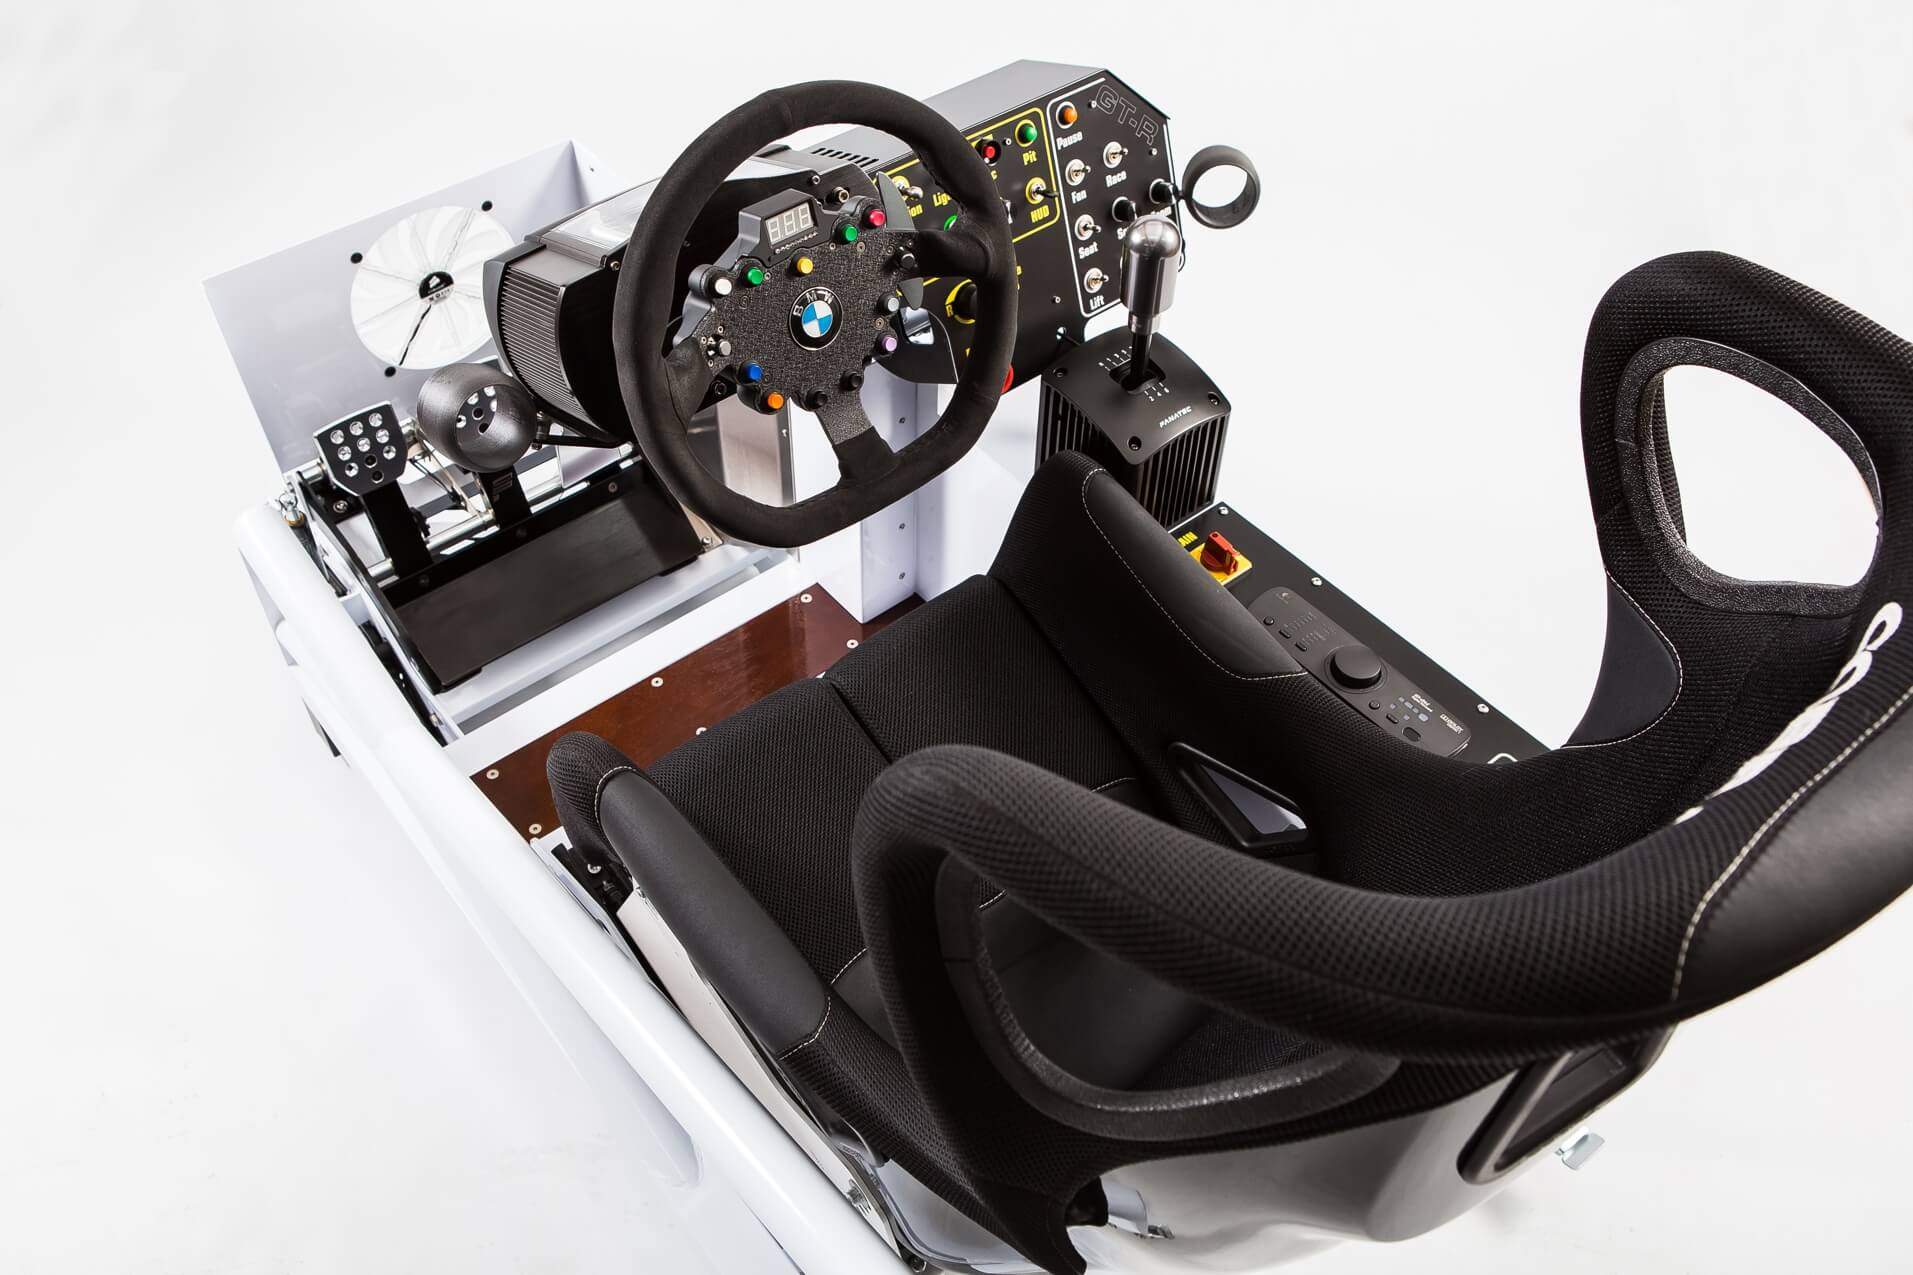 The sim racing rig Len built to race with in the local Sports and GT iRacing series.